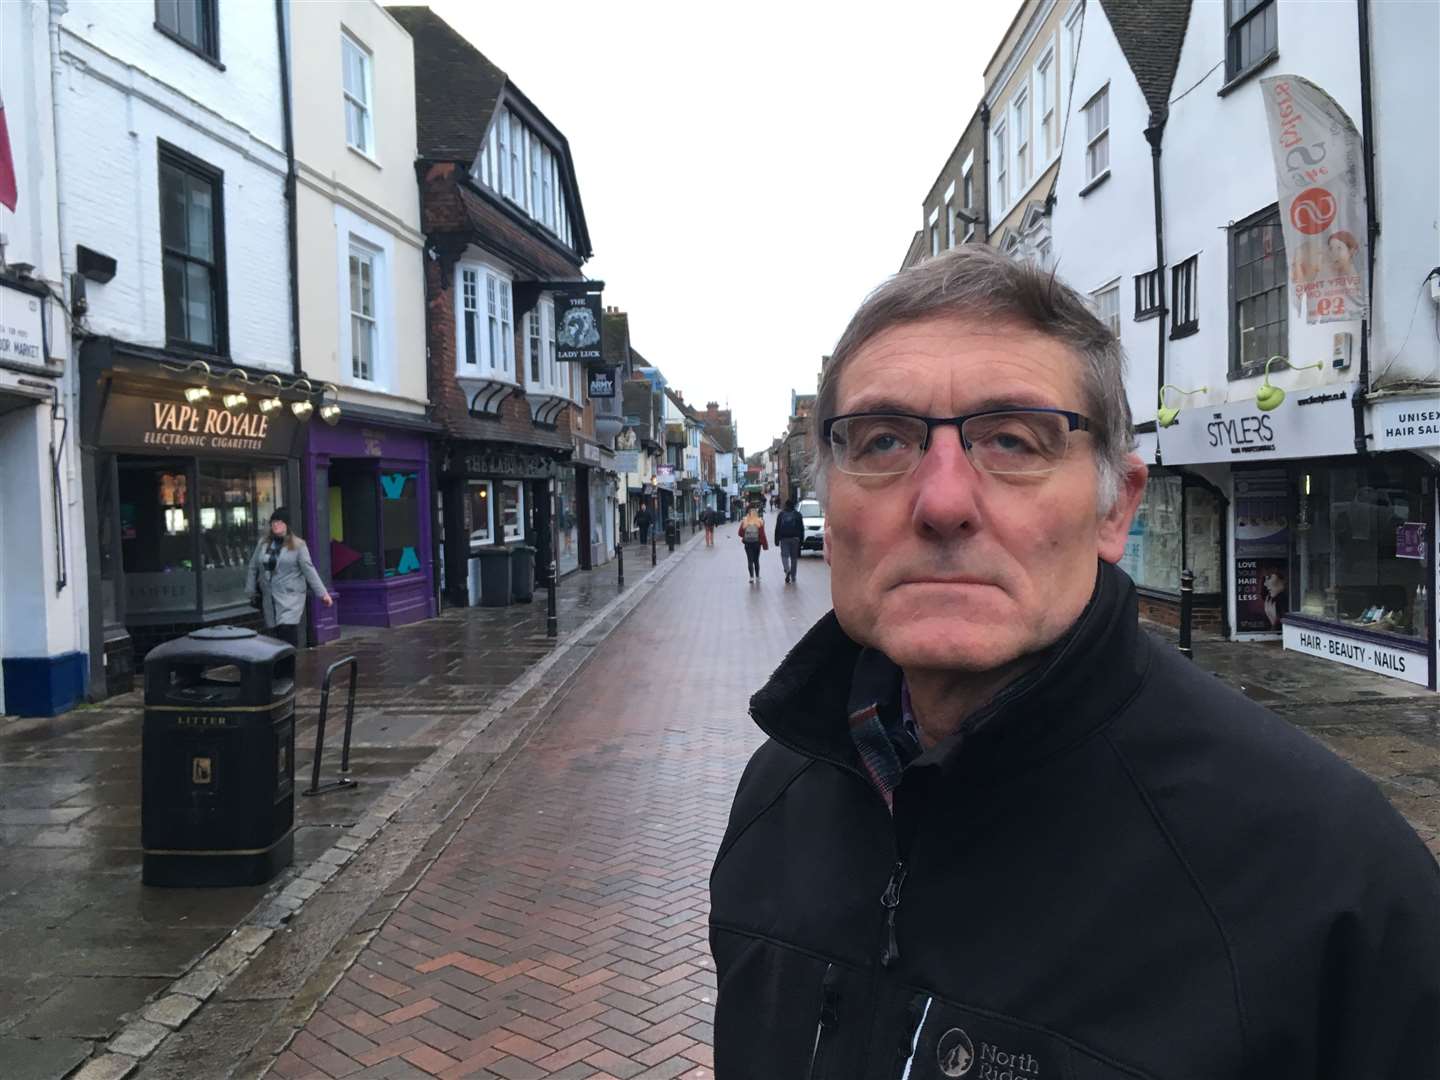 Labour Cllr Alan Baldock is "extremely worried" about the plans